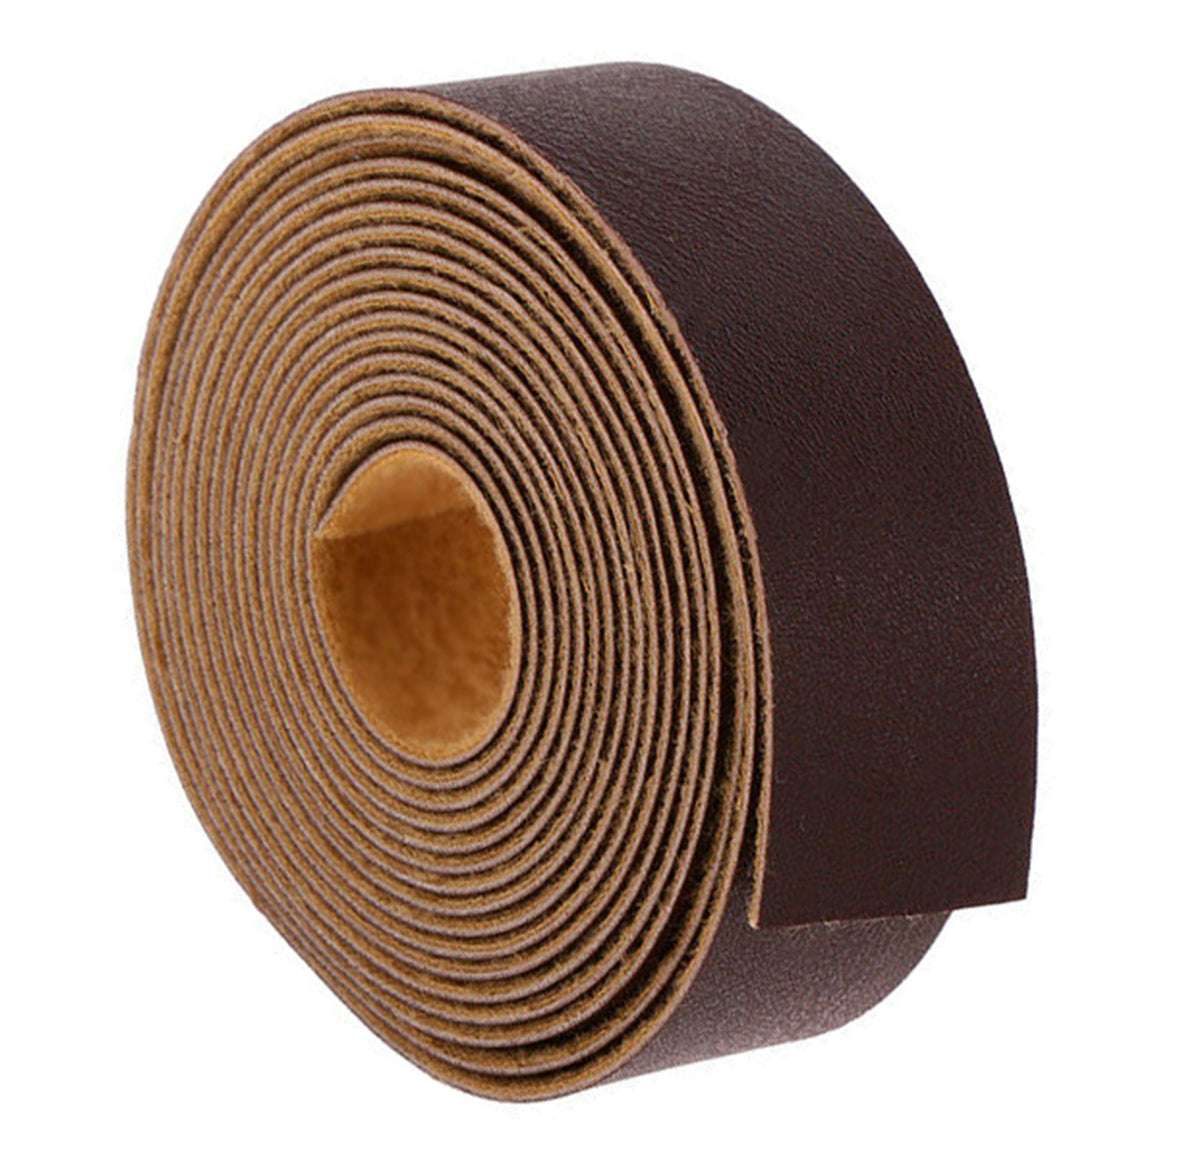 1/2brown Leather,leather Strips,leather for Belts,italian Natural  Leather,leather Strap,cowhide Leather,leather for Bag Straps,calf Leather 